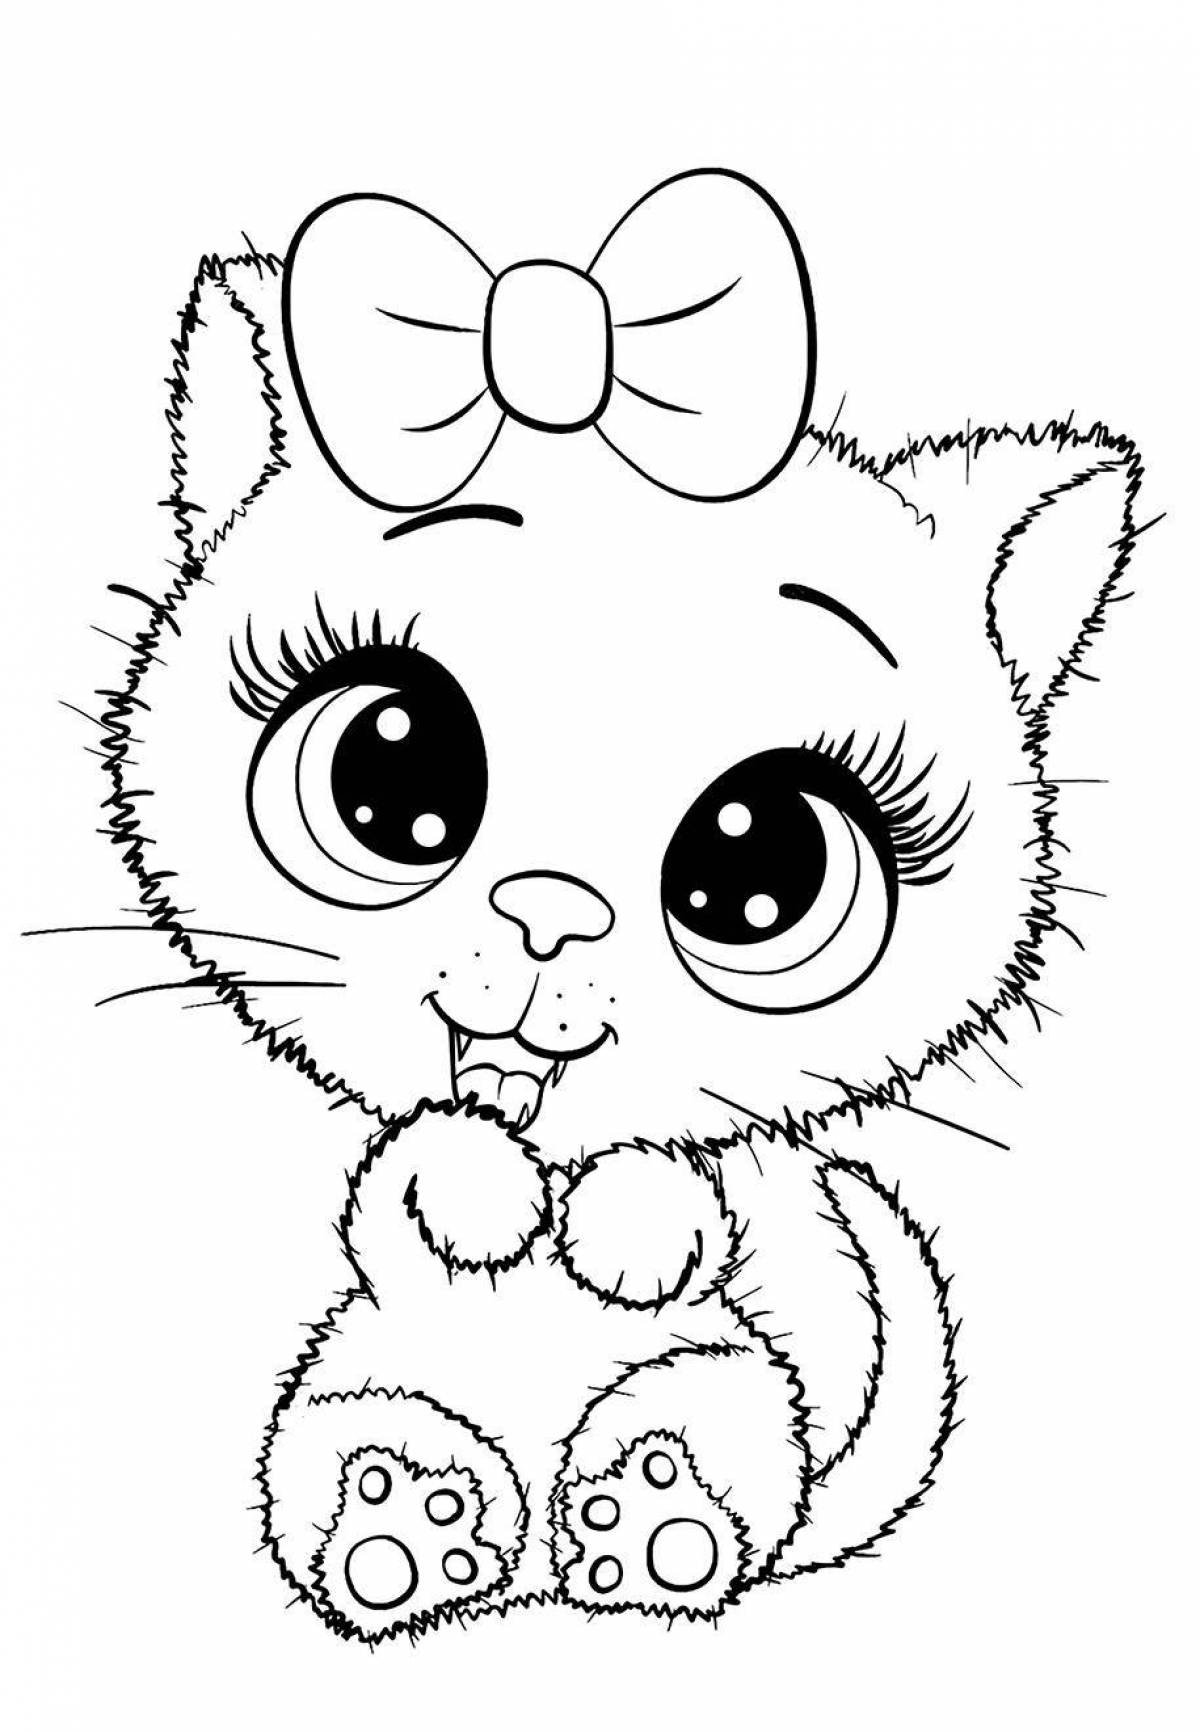 Amazing coloring pages for girls, cute fluffies